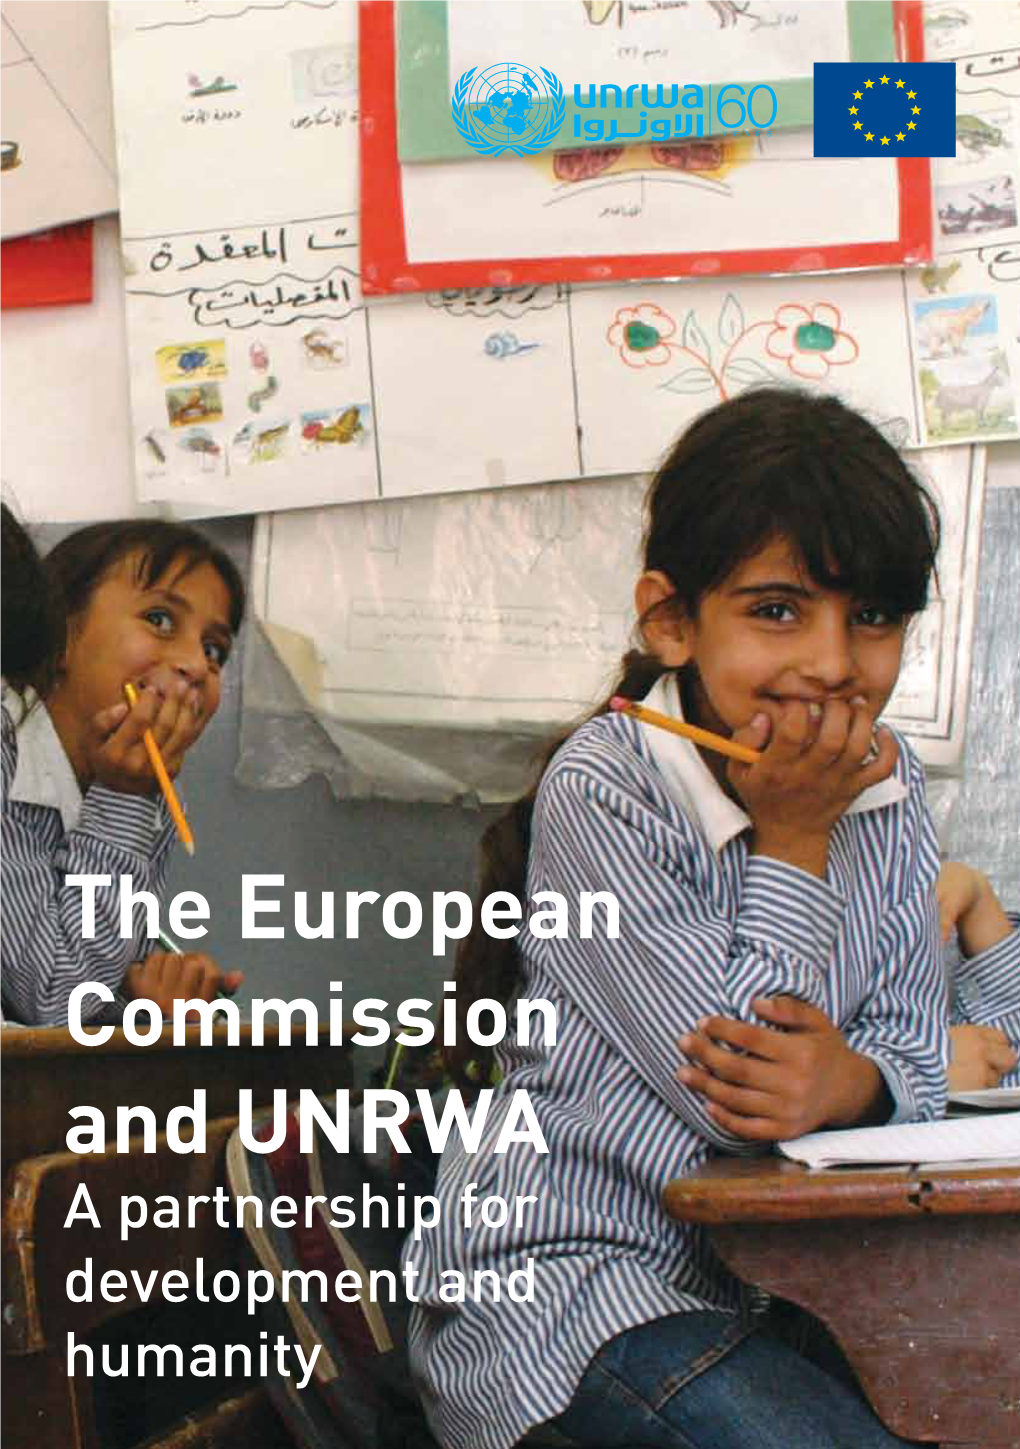 The European Commission and UNRWA